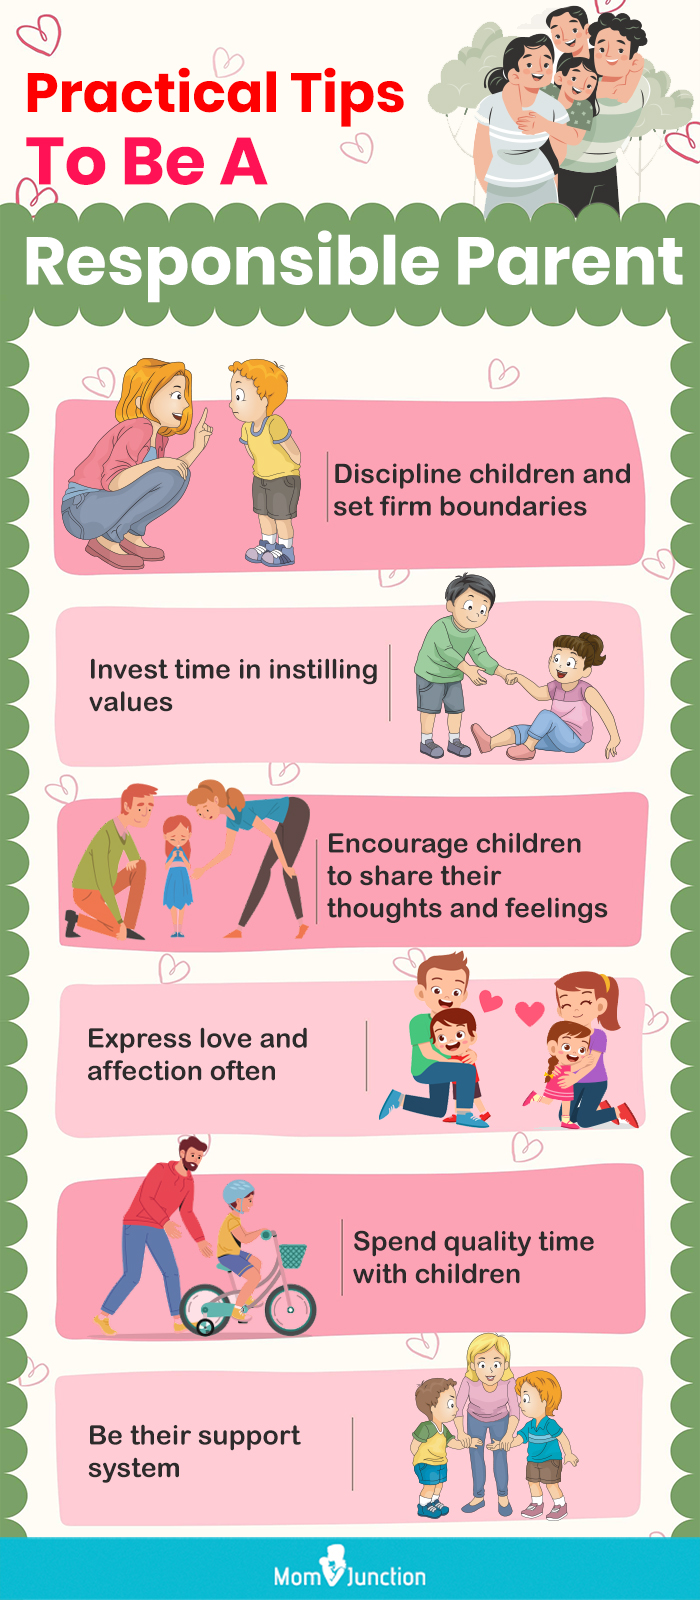 practical tips to be a responsible parent [infographic]